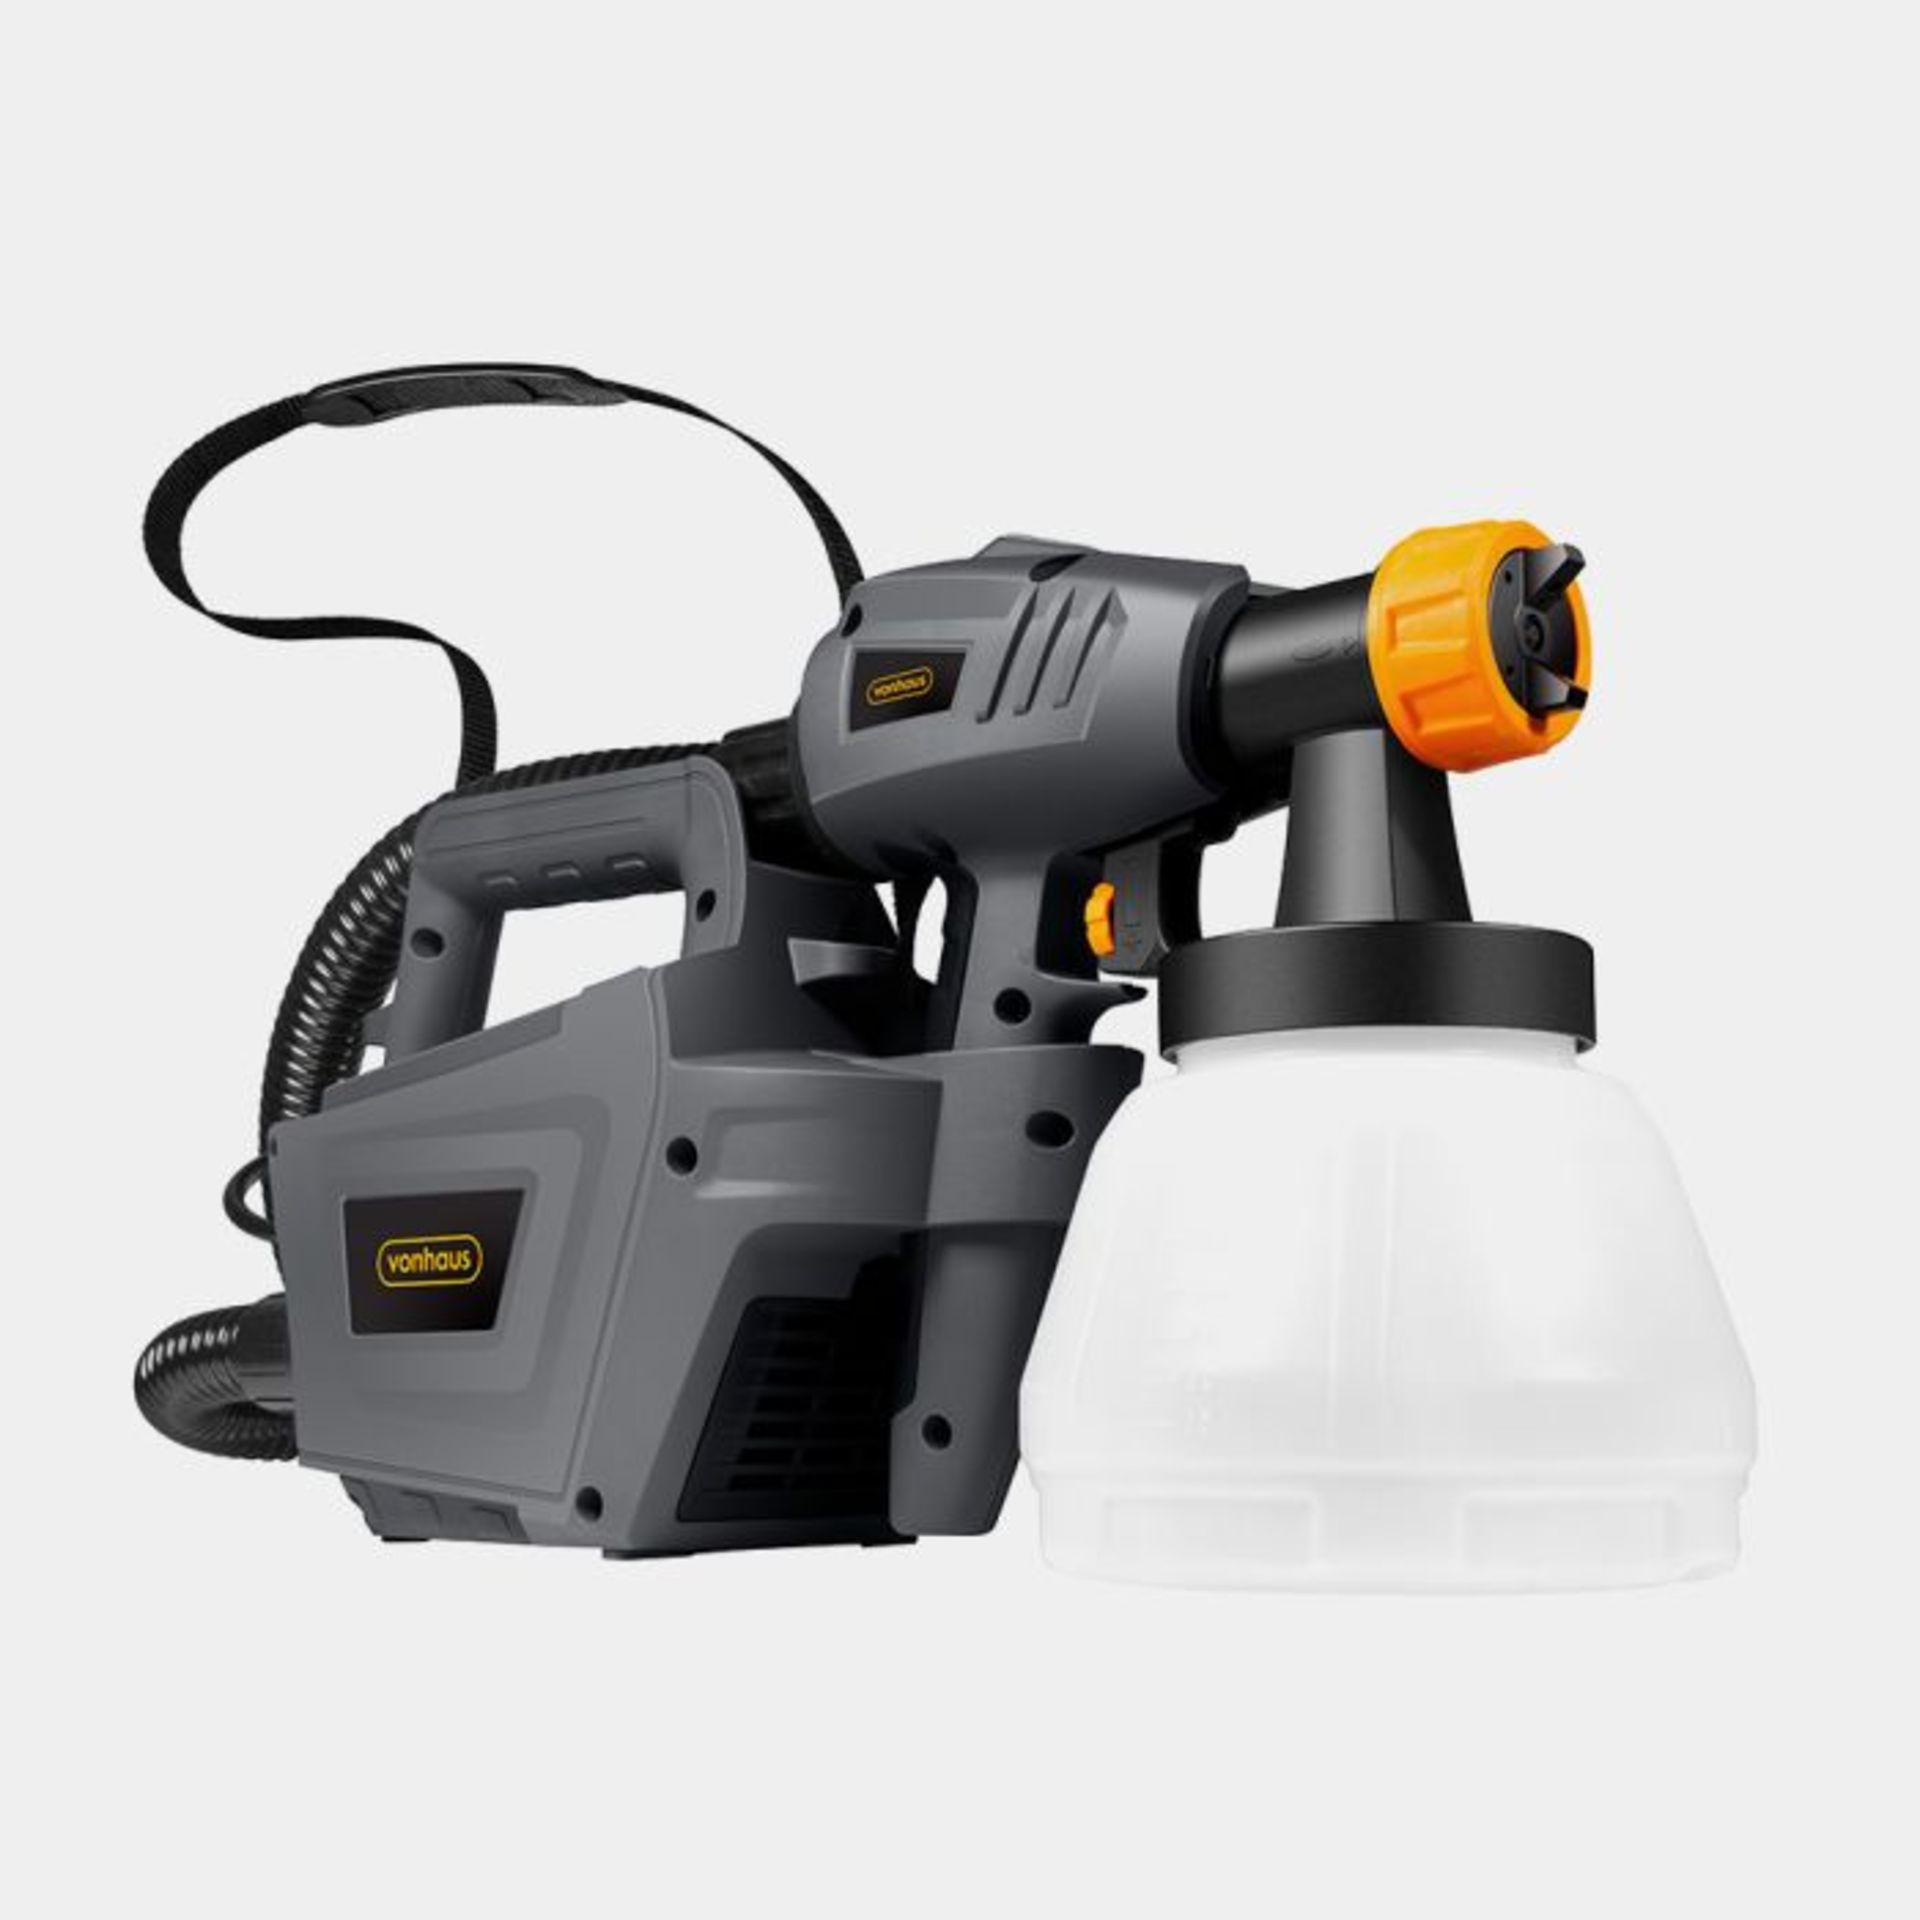 800W Paint Sprayer. - ER36. Suitable for indoor and outdoor use, as well as for all kinds of